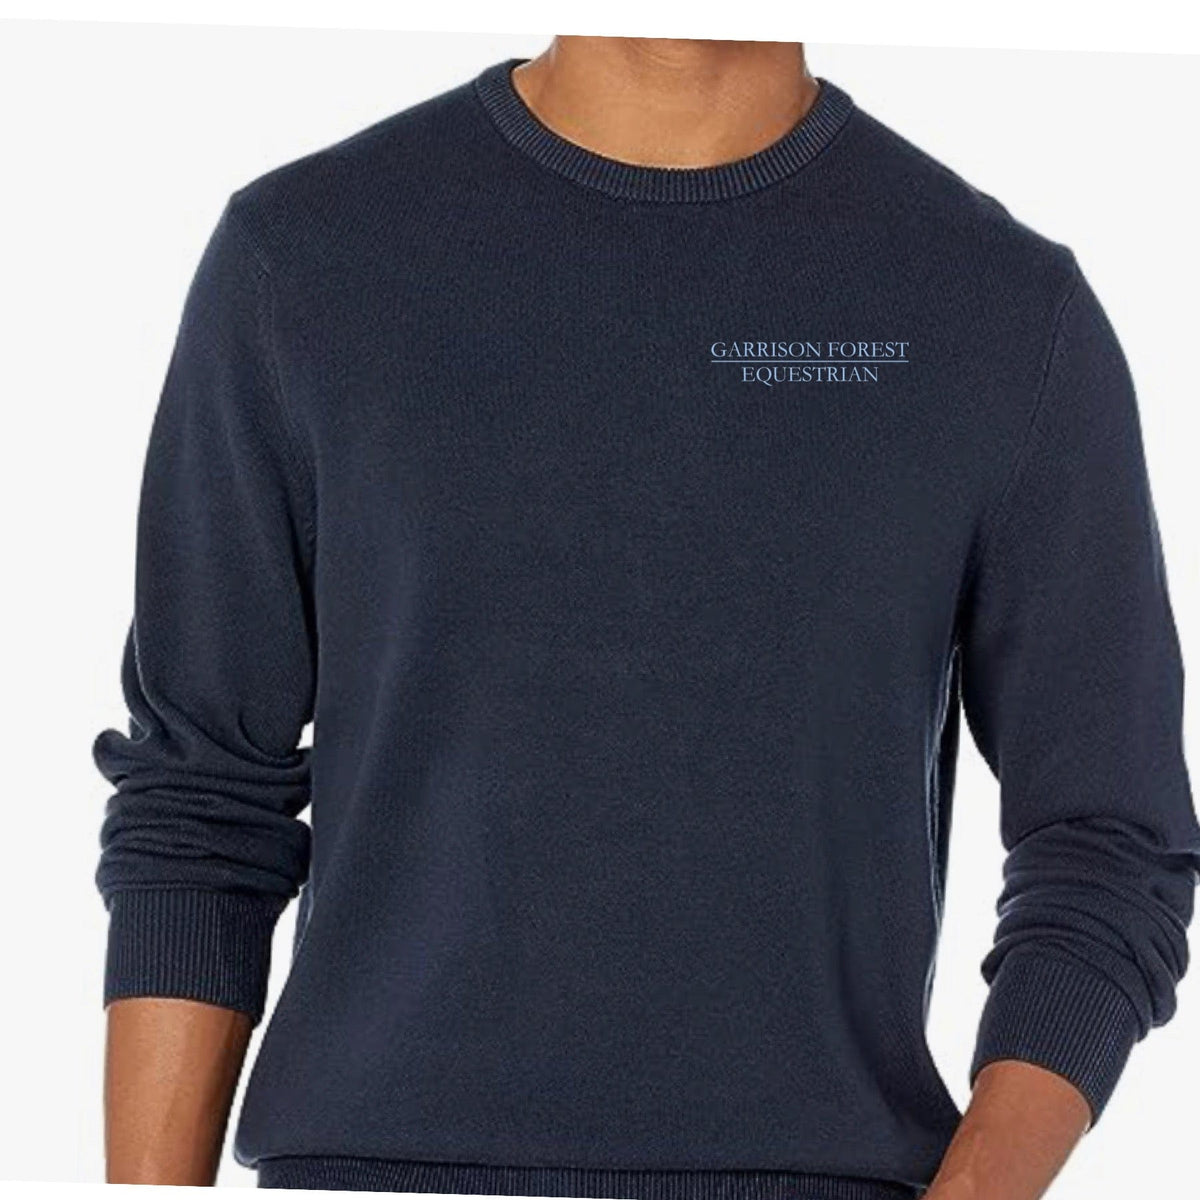 Equestrian Team Apparel Garrison Forest Equestrian Men's Sweaters equestrian team apparel online tack store mobile tack store custom farm apparel custom show stable clothing equestrian lifestyle horse show clothing riding clothes horses equestrian tack store